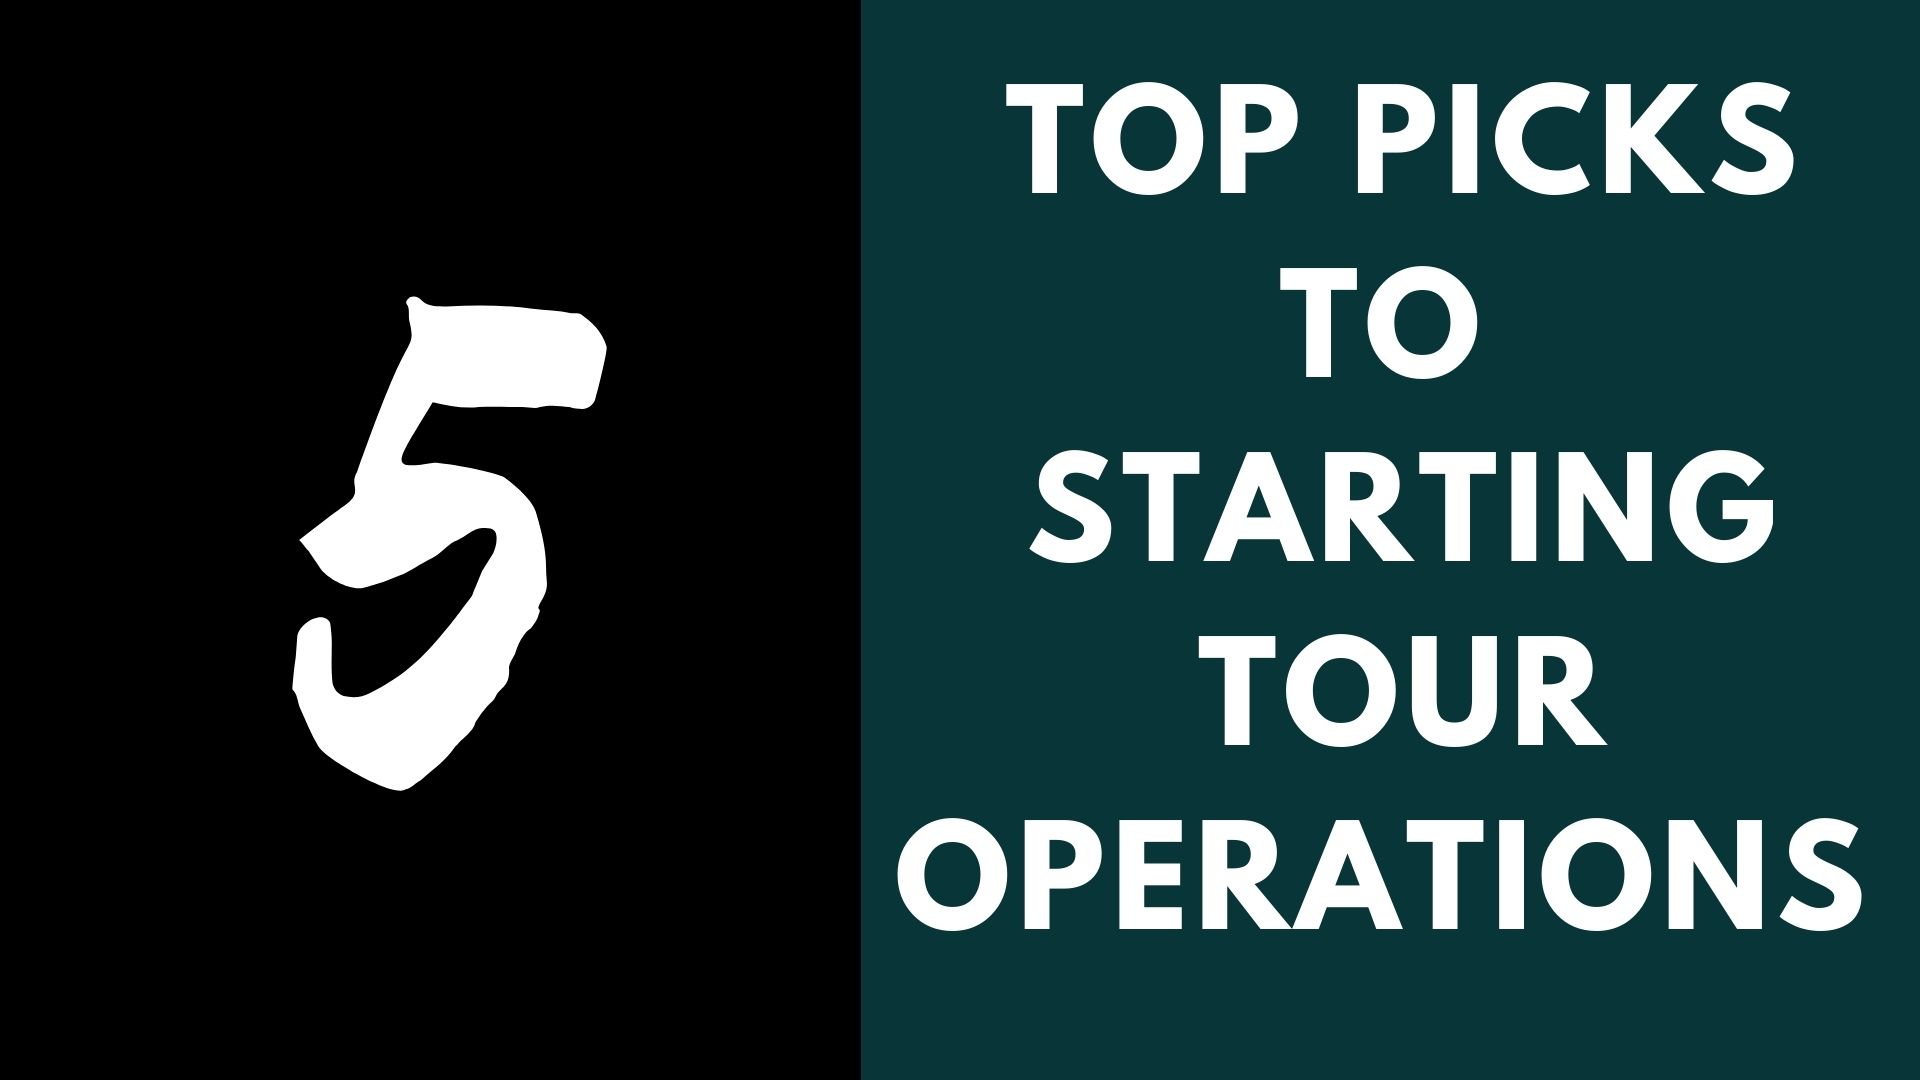 5 Best Picks To Starting Tour Operations